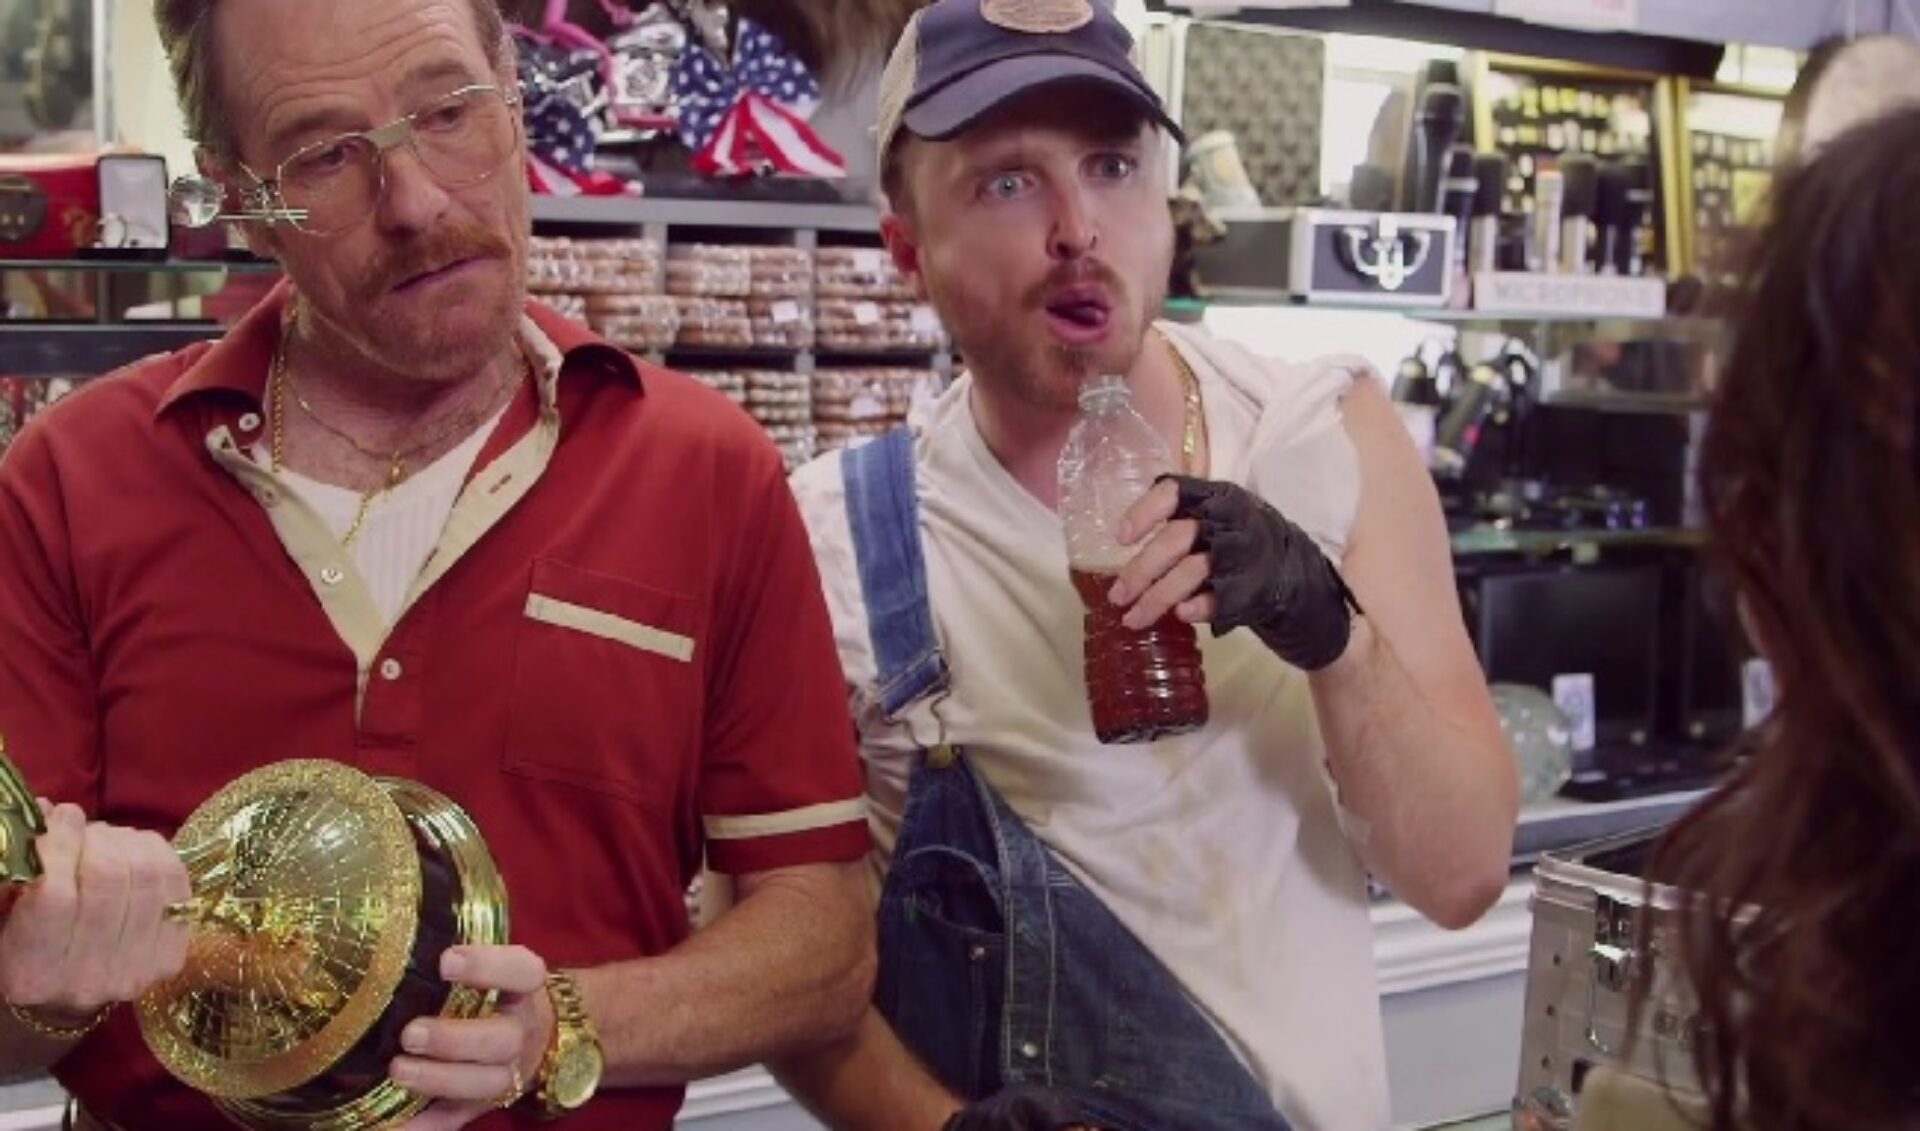 Julia Louis-Dreyfus Pawns Her Emmy To Aaron Paul And Bryan Cranston In Promo